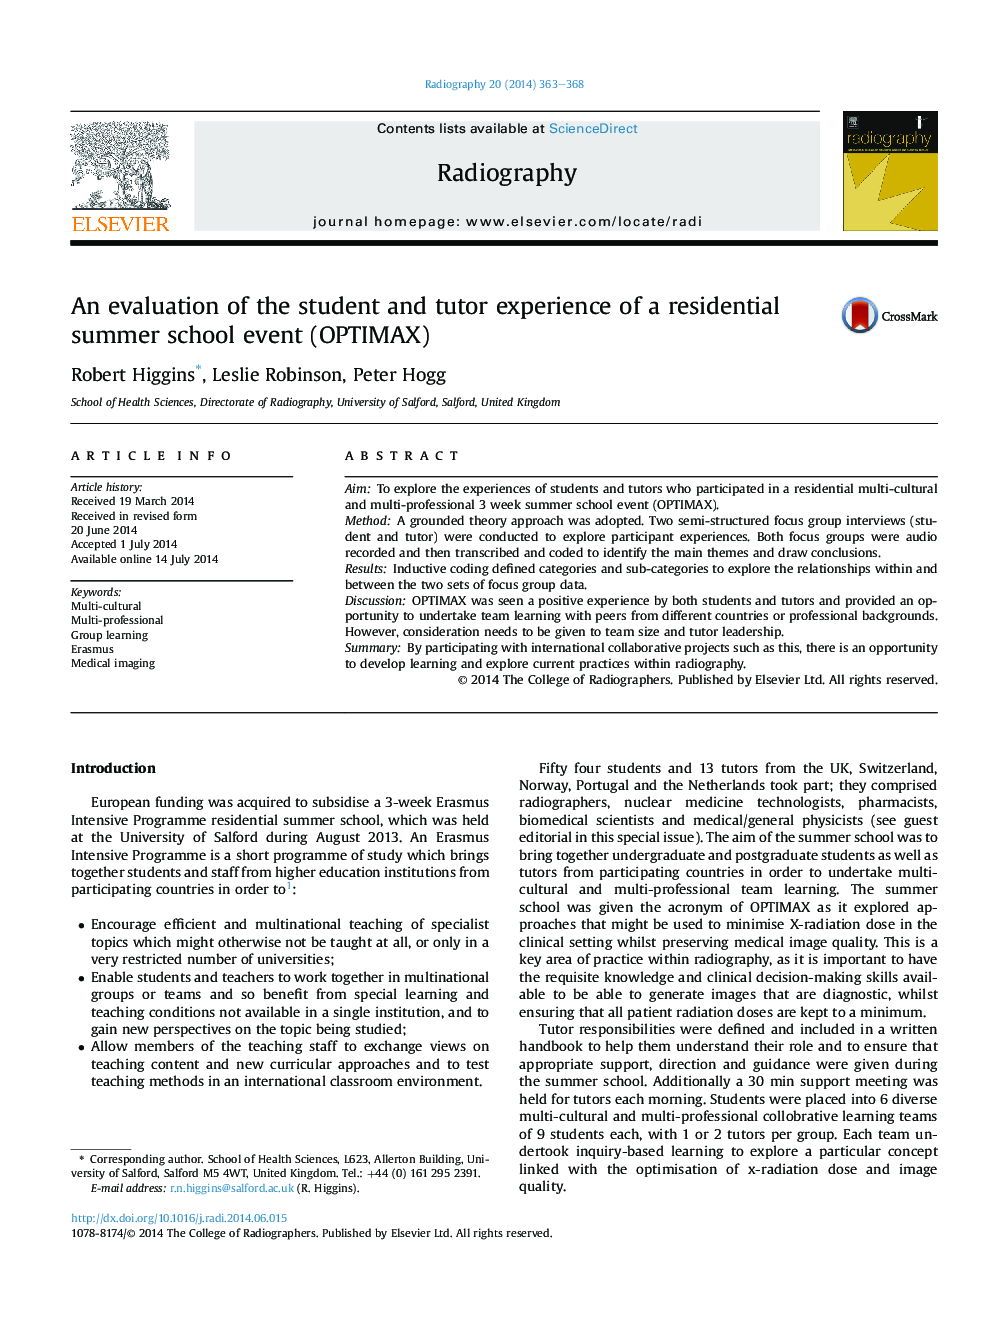 An evaluation of the student and tutor experience of a residential summer school event (OPTIMAX)